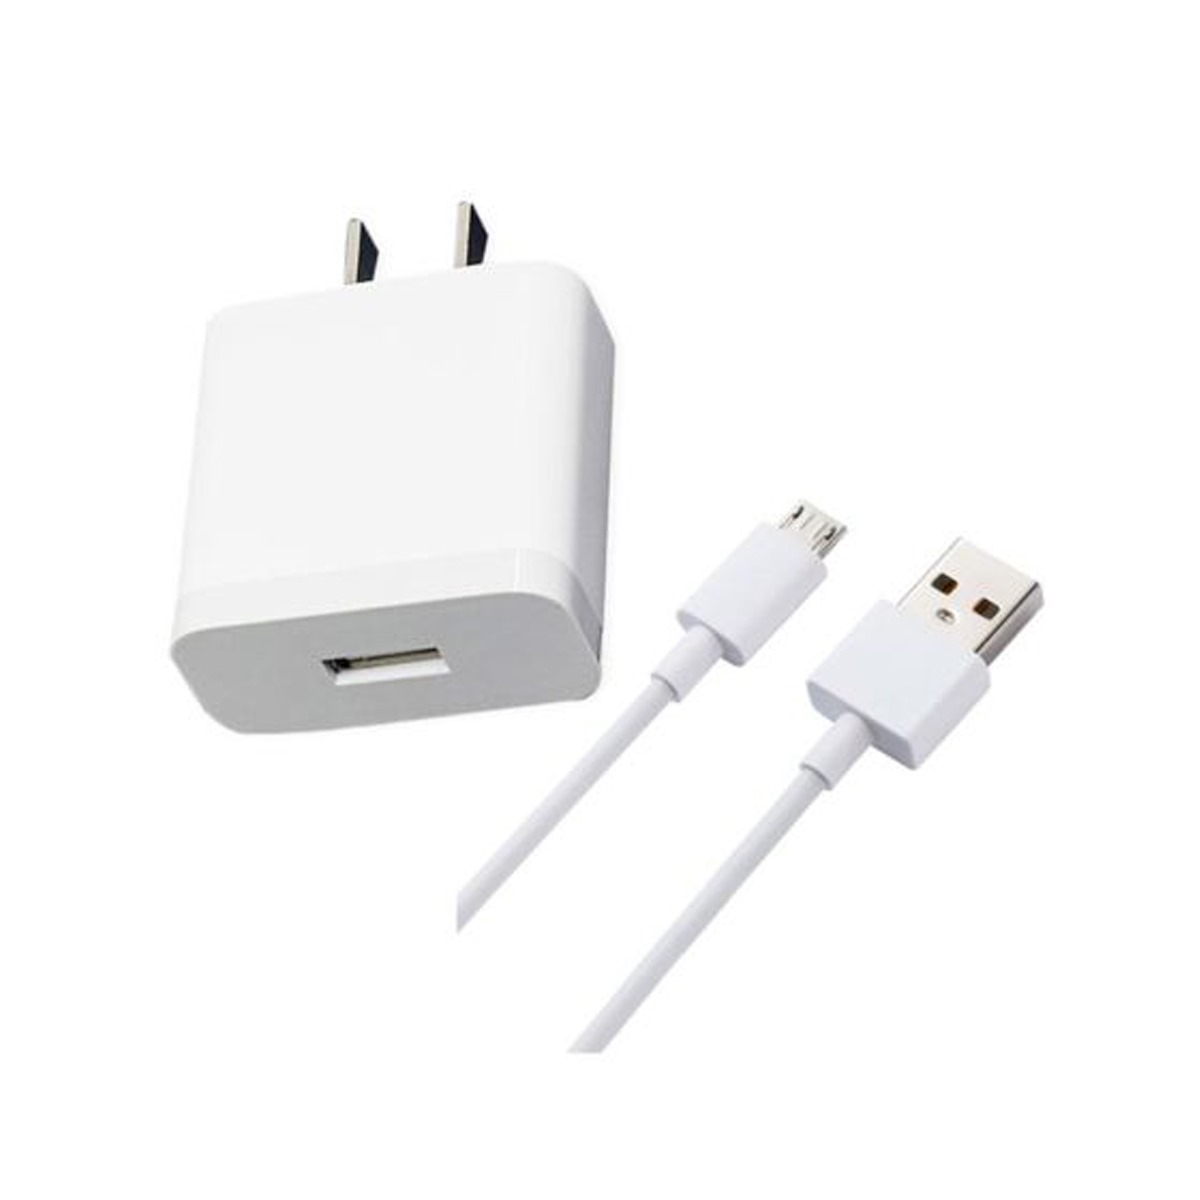 Xiaomi USB Charger with Micro USB Cable